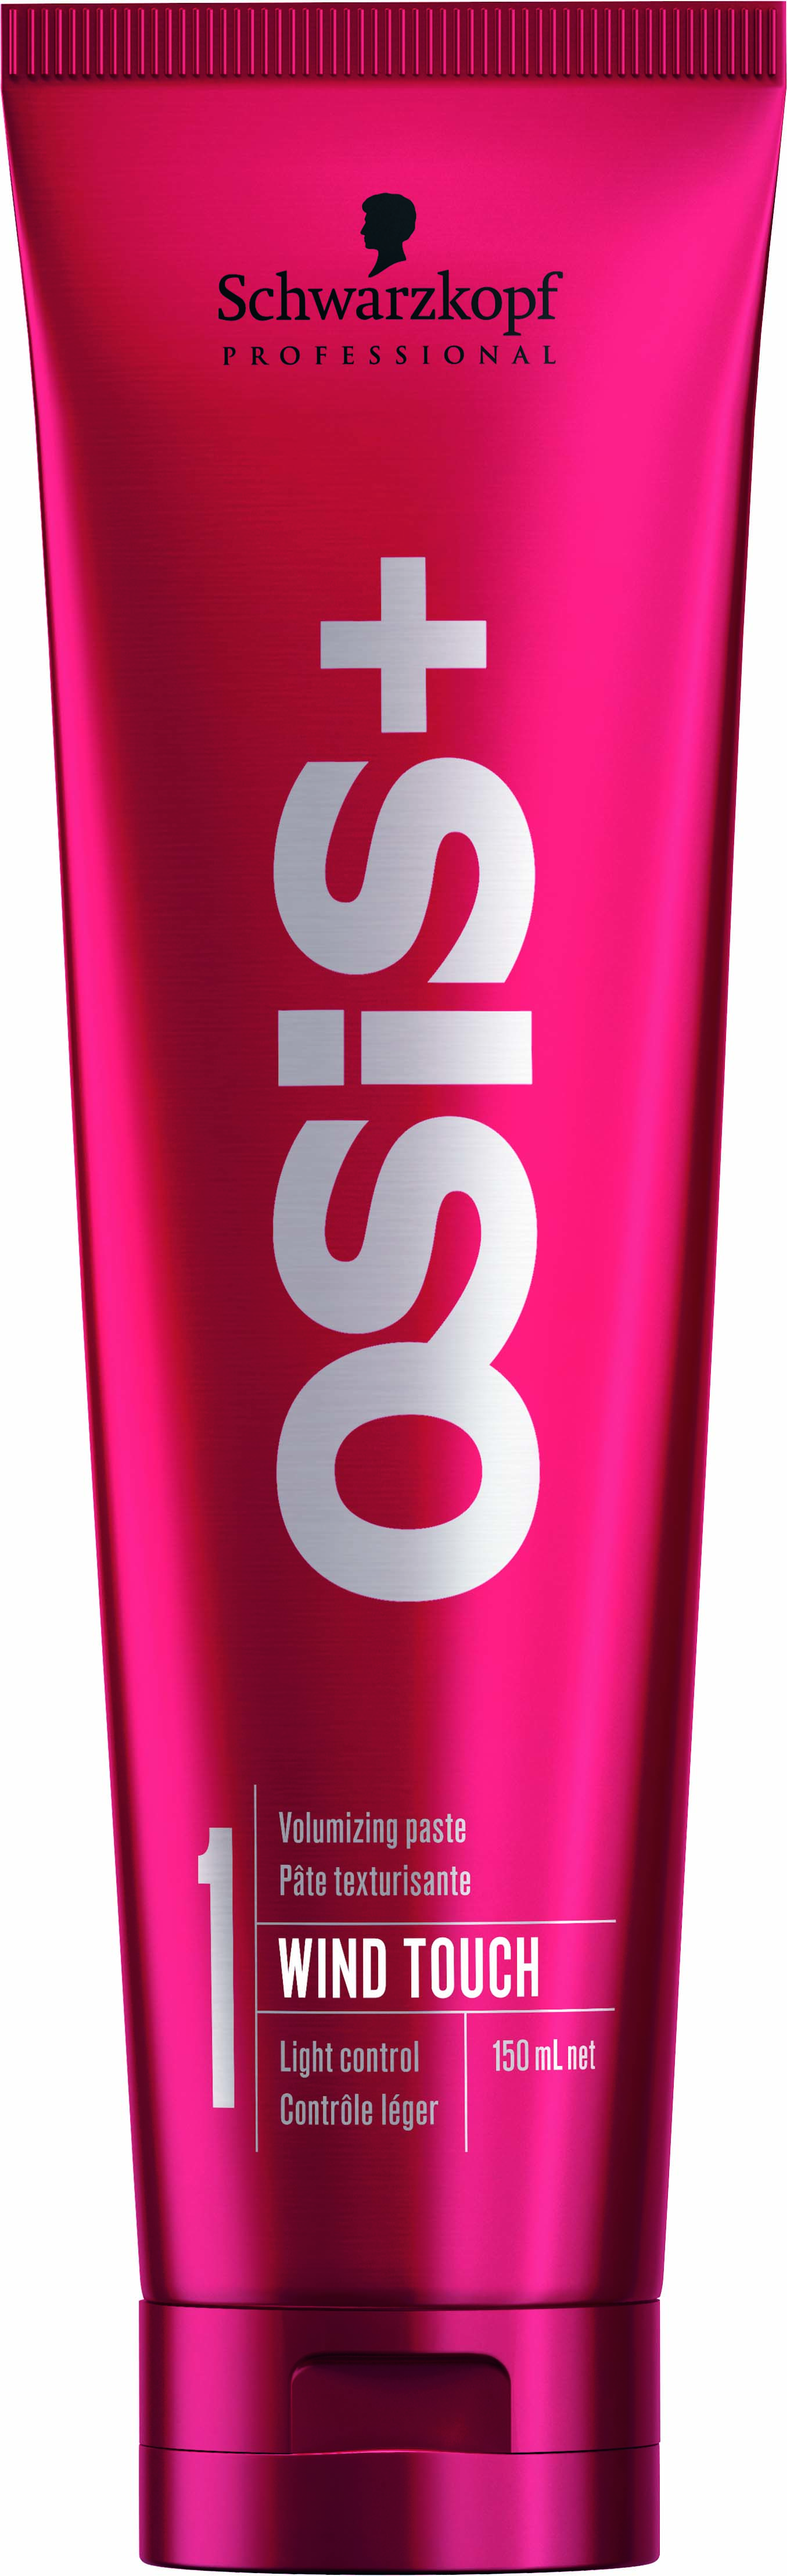 OSiS+ Wind Touch, 150ml